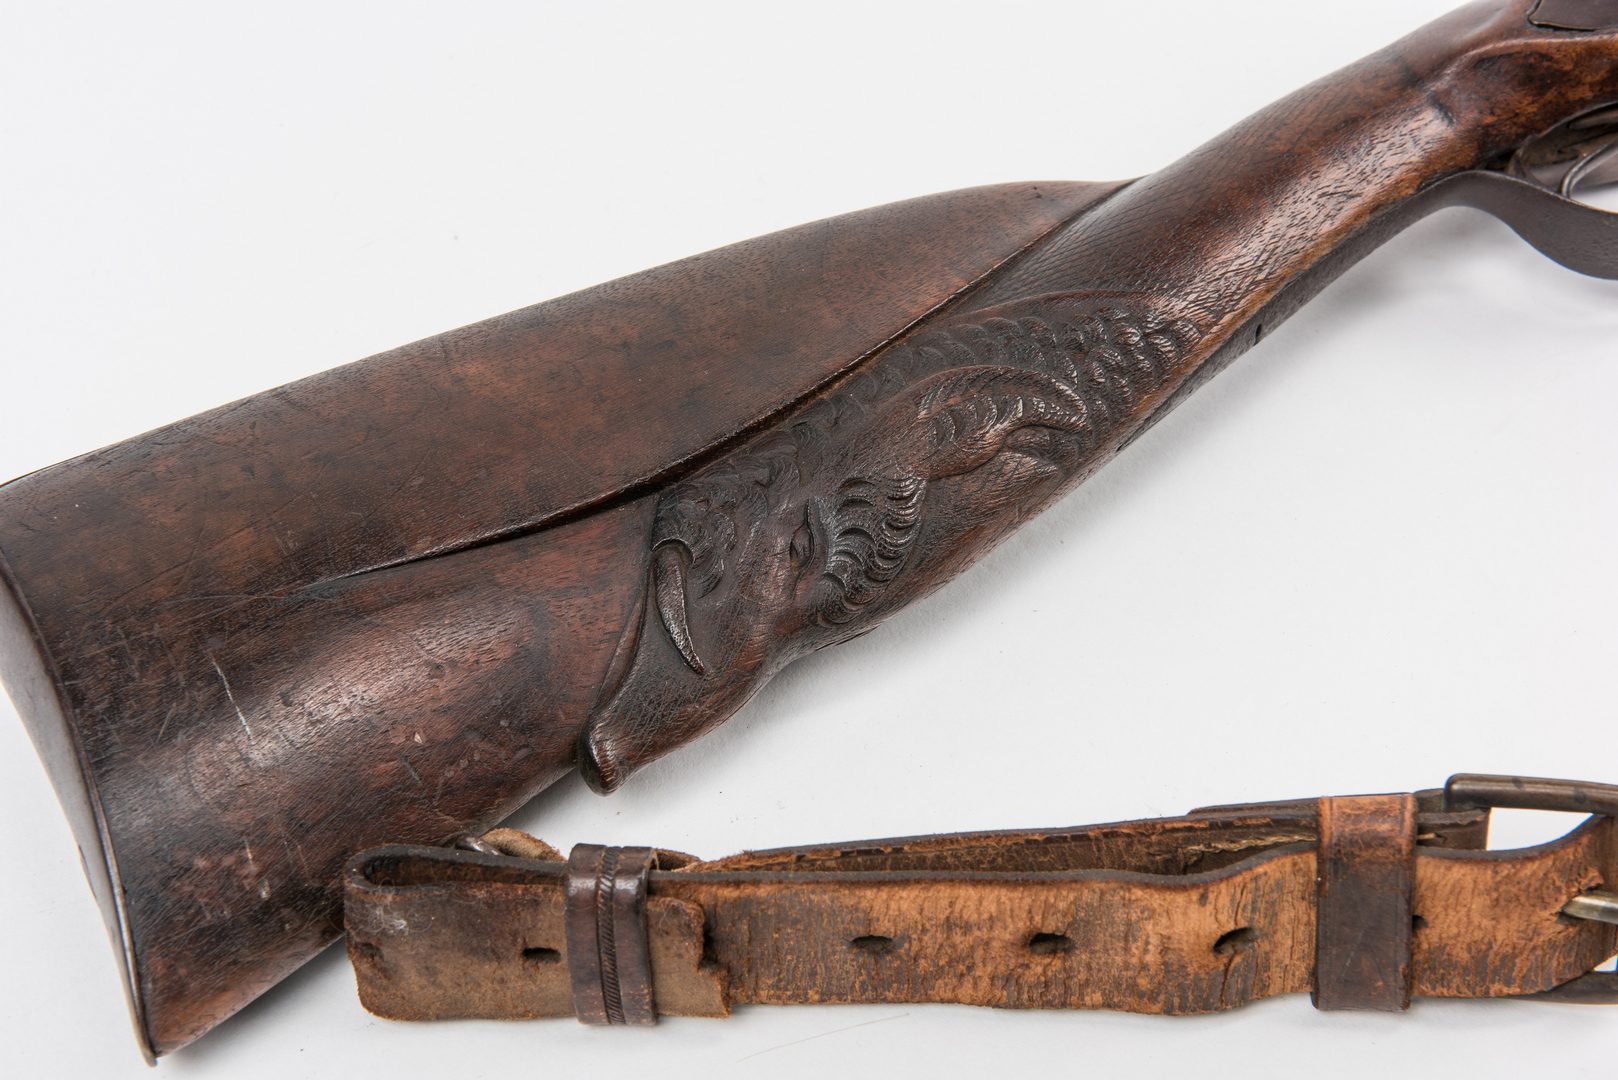 Lot 322: New Orleans Agent Marked C. Redon European Side by Side Percussion Shotgun, 16 gauge